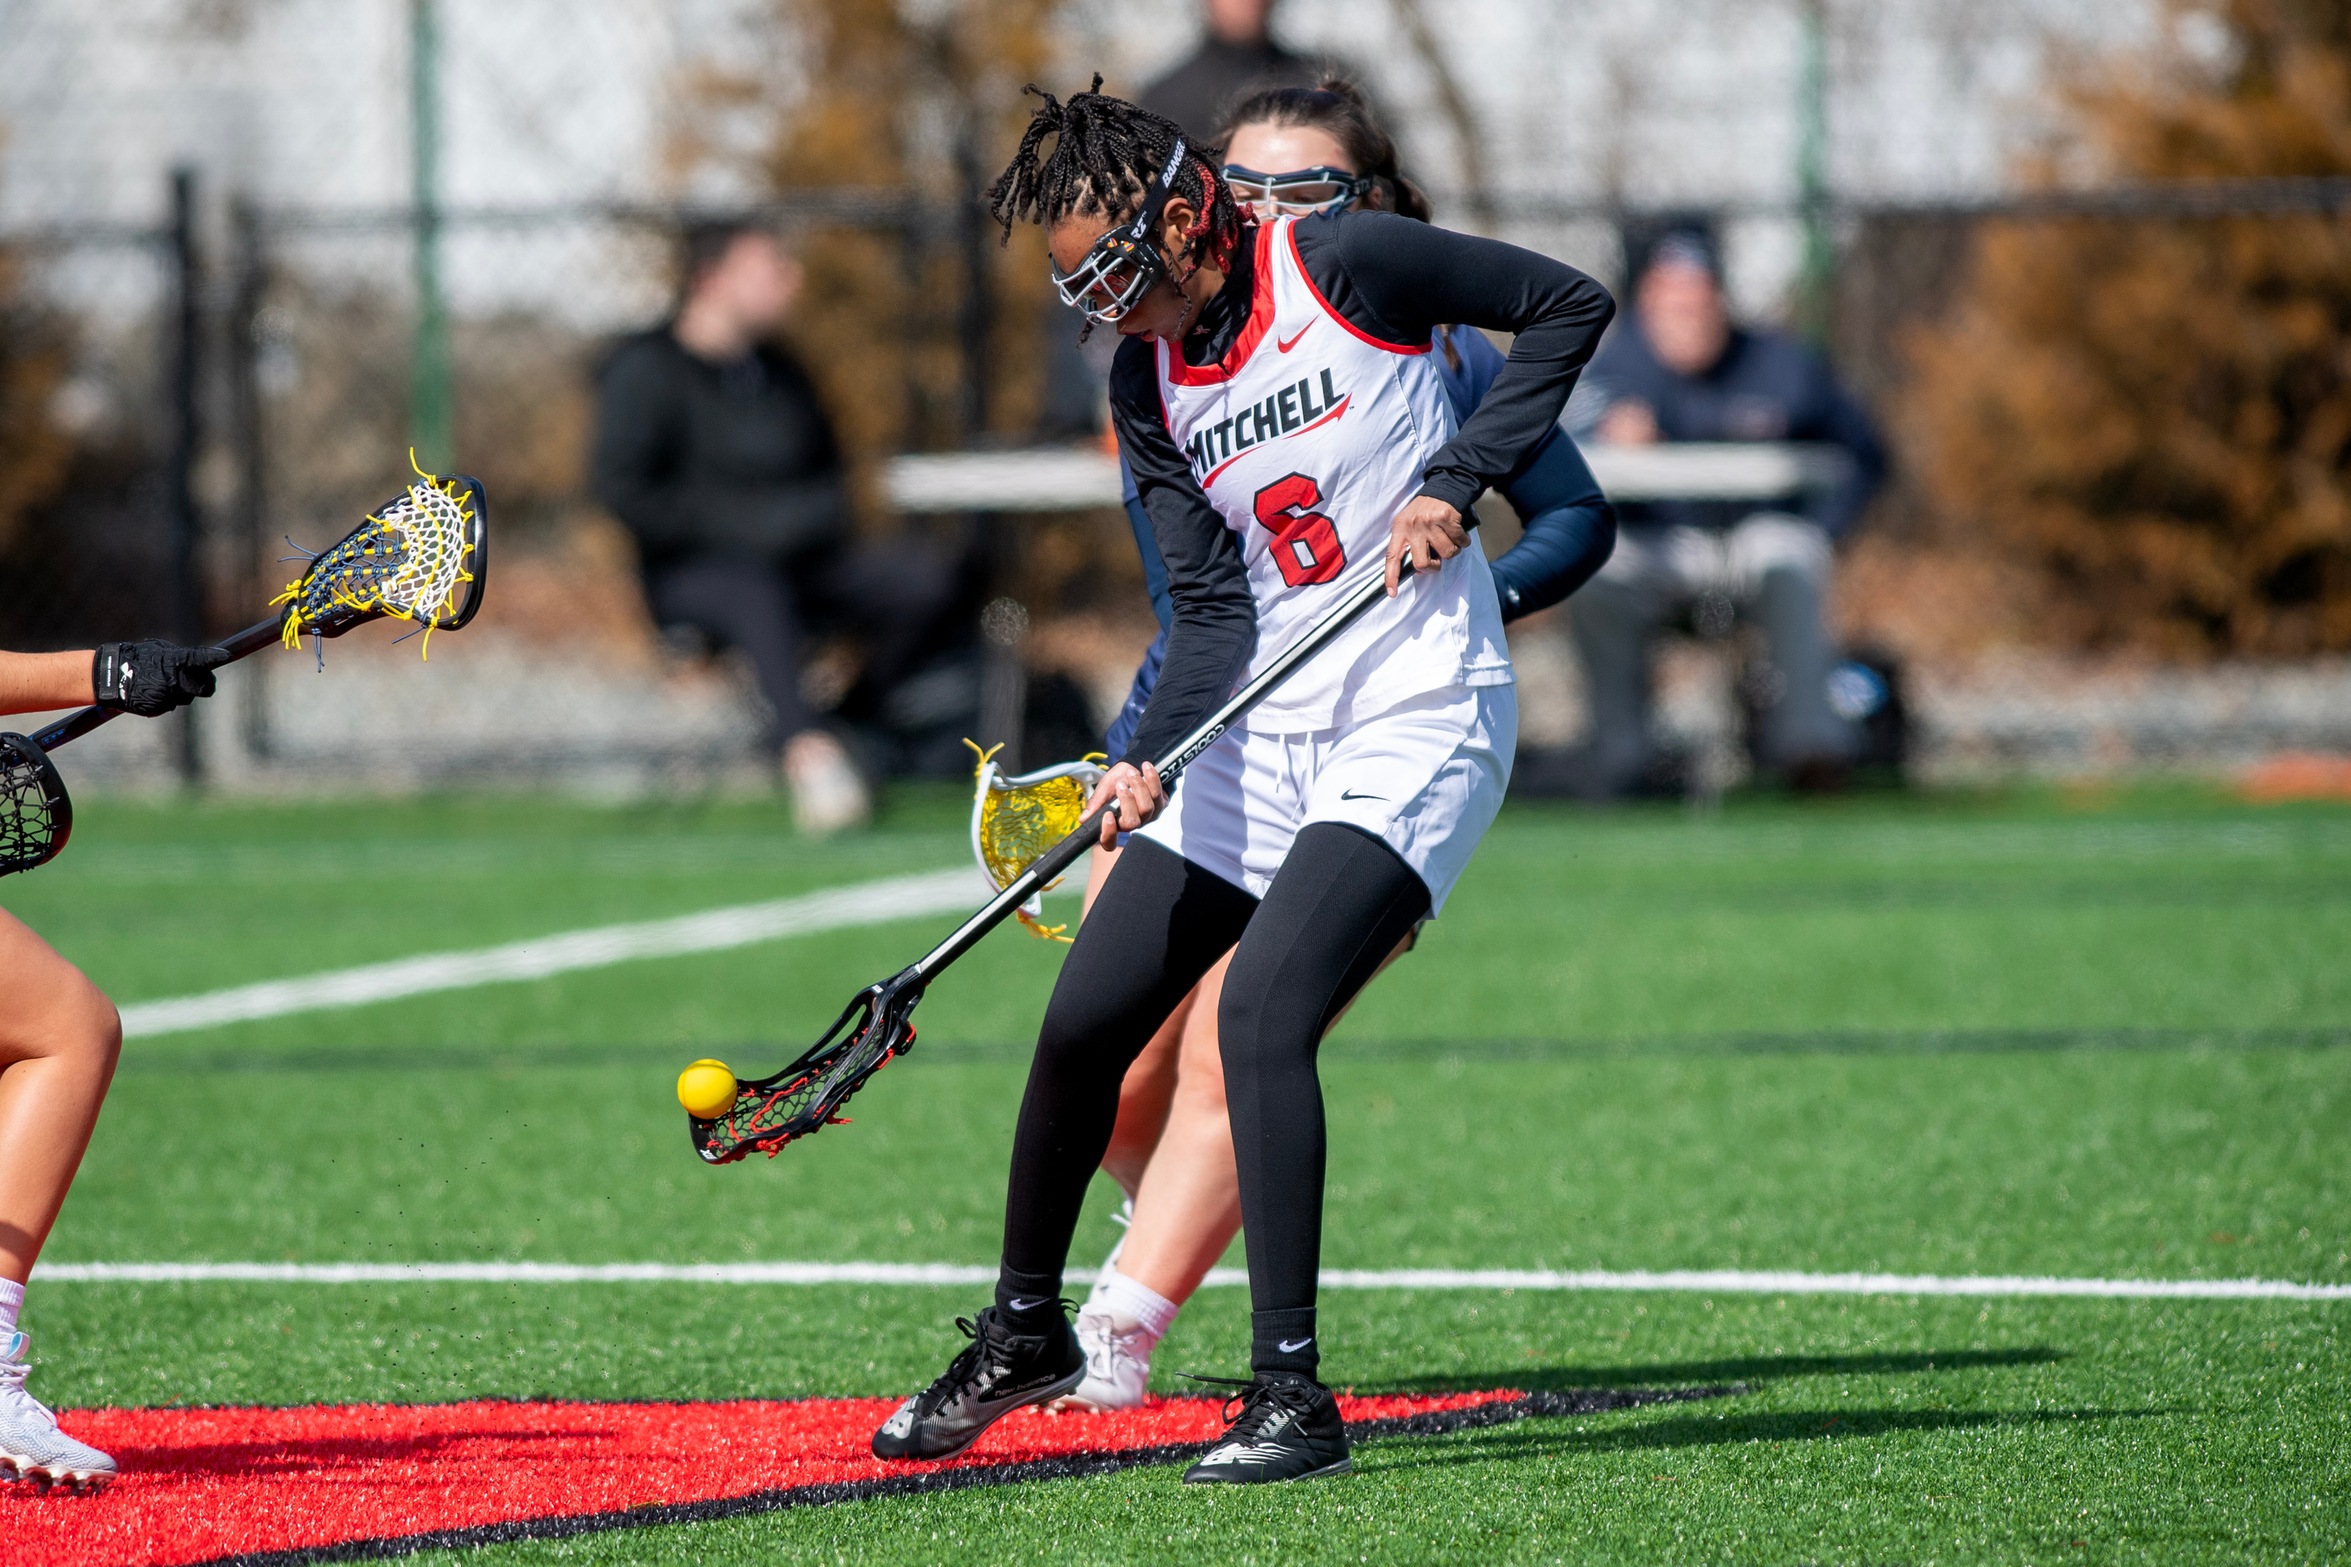 WLAX Falls to Dean in Final Home Game of Season